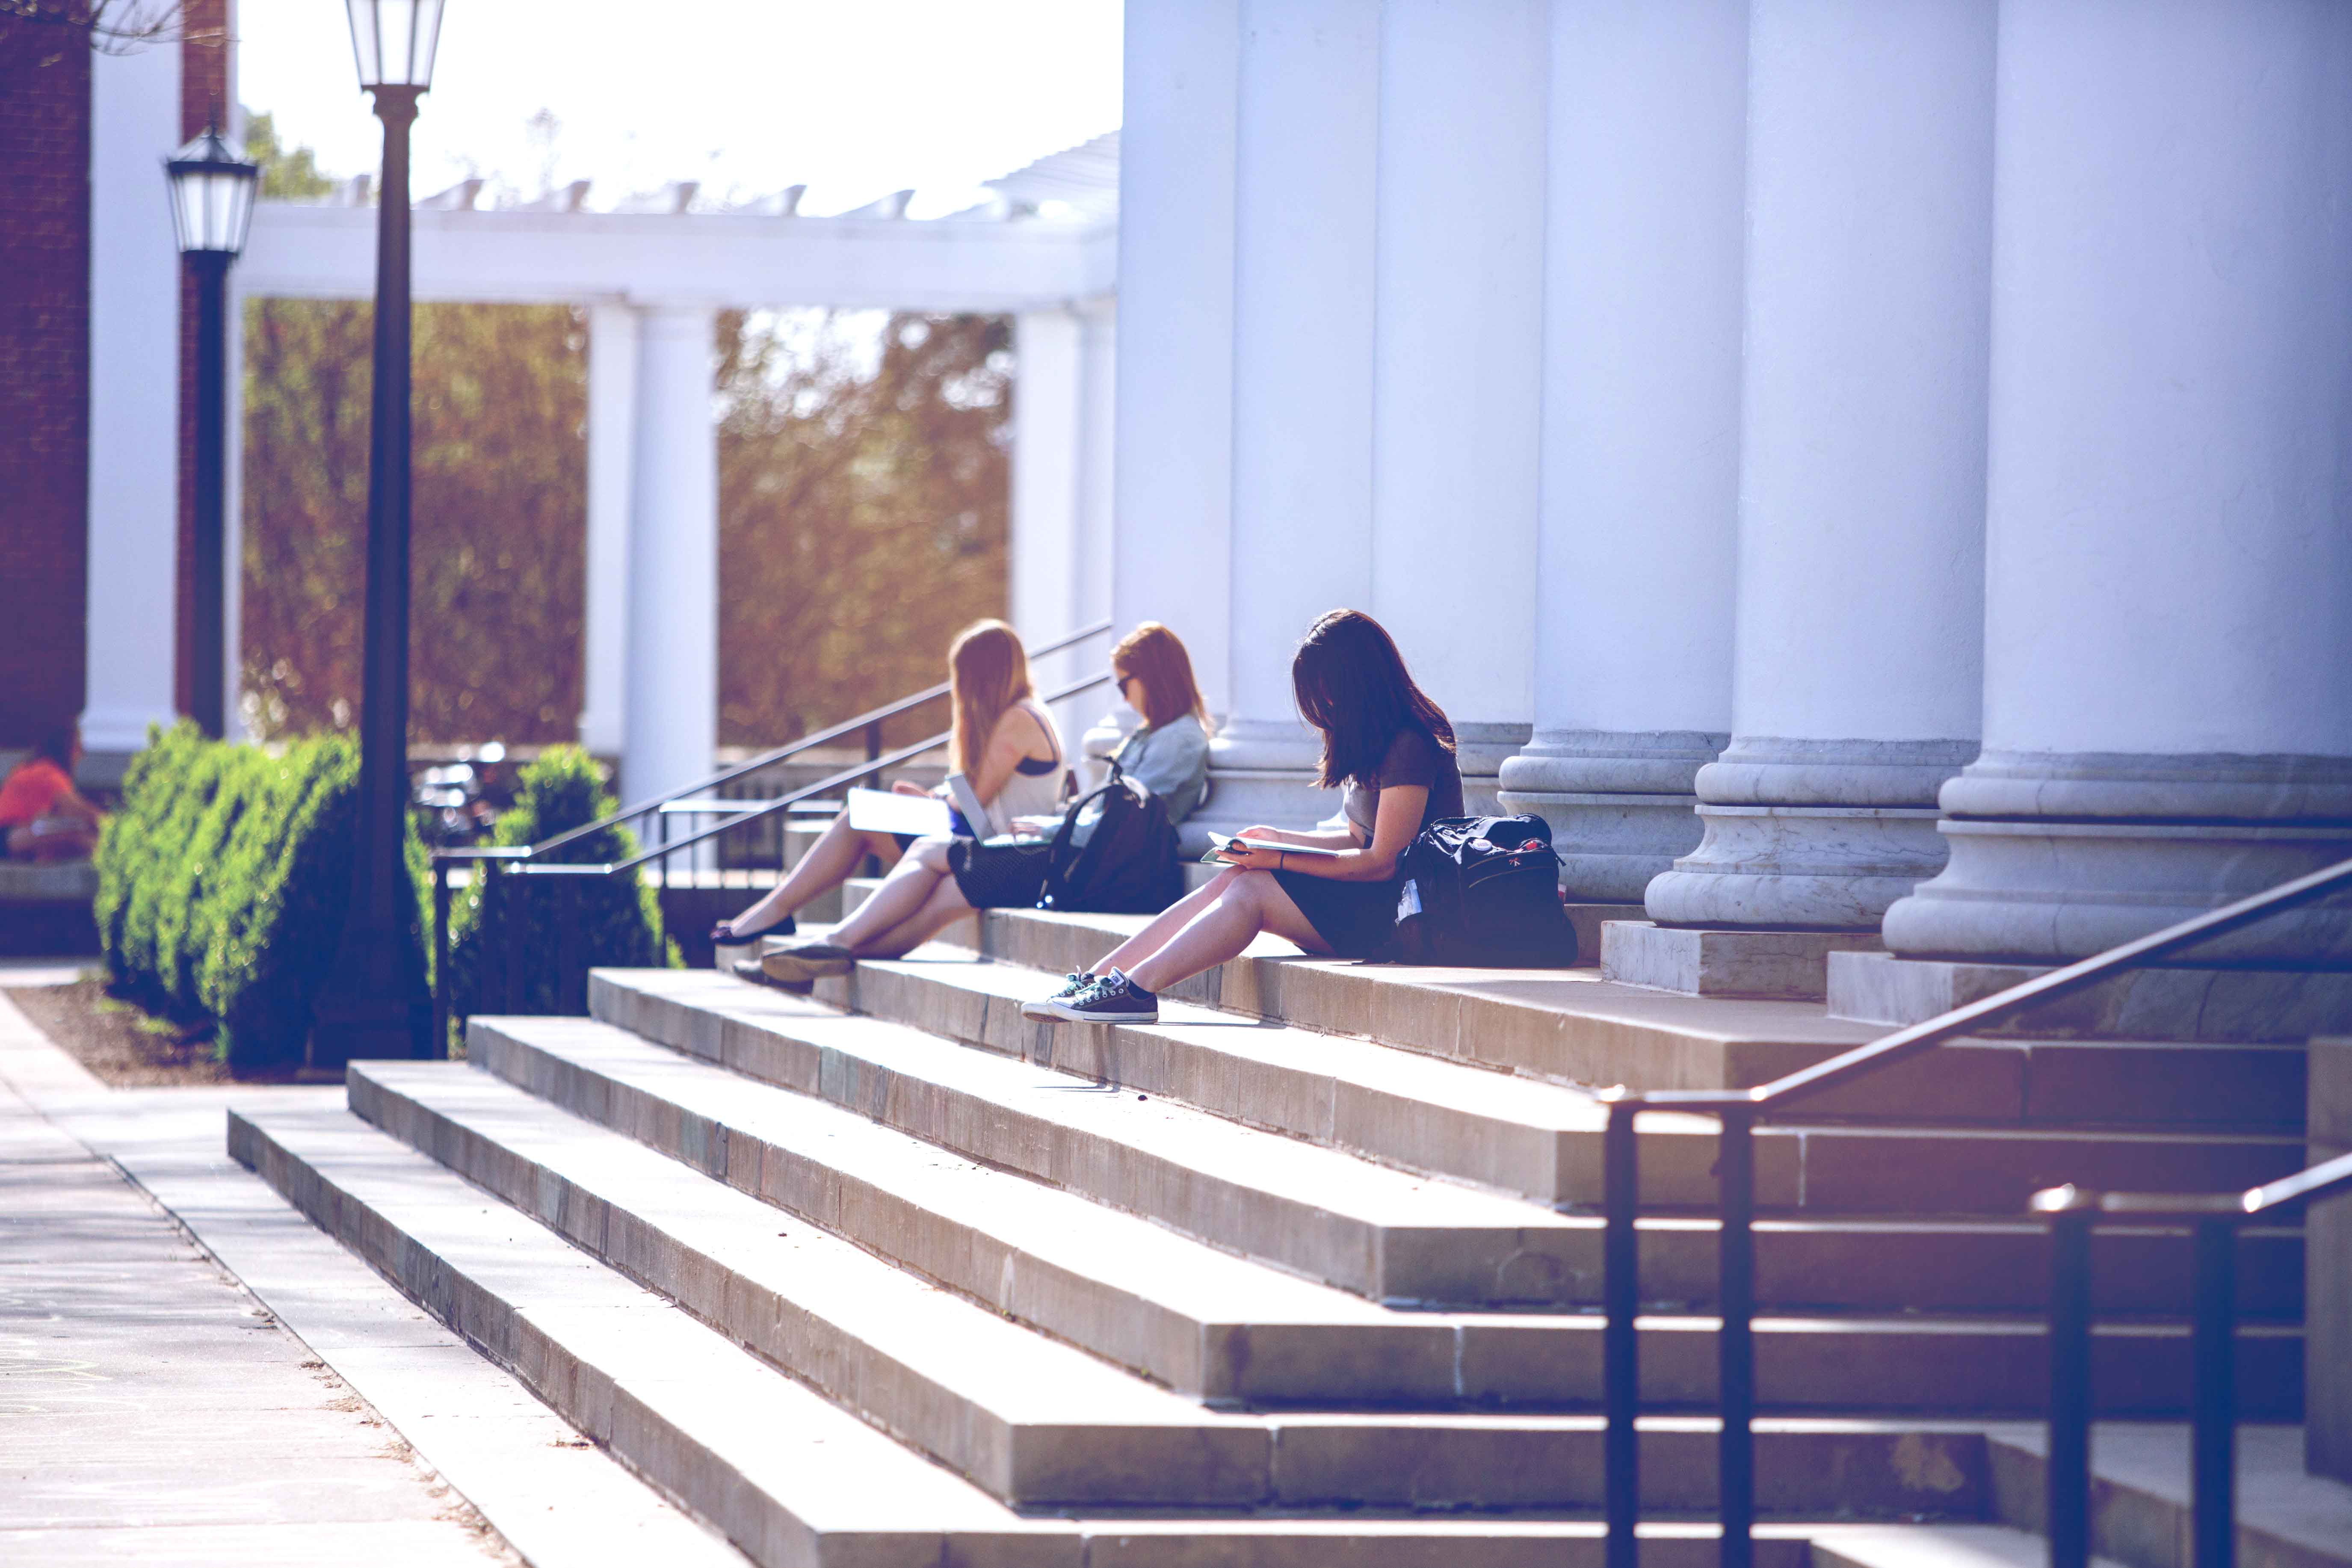 Students sitting on steps reading outside of a building on grounds